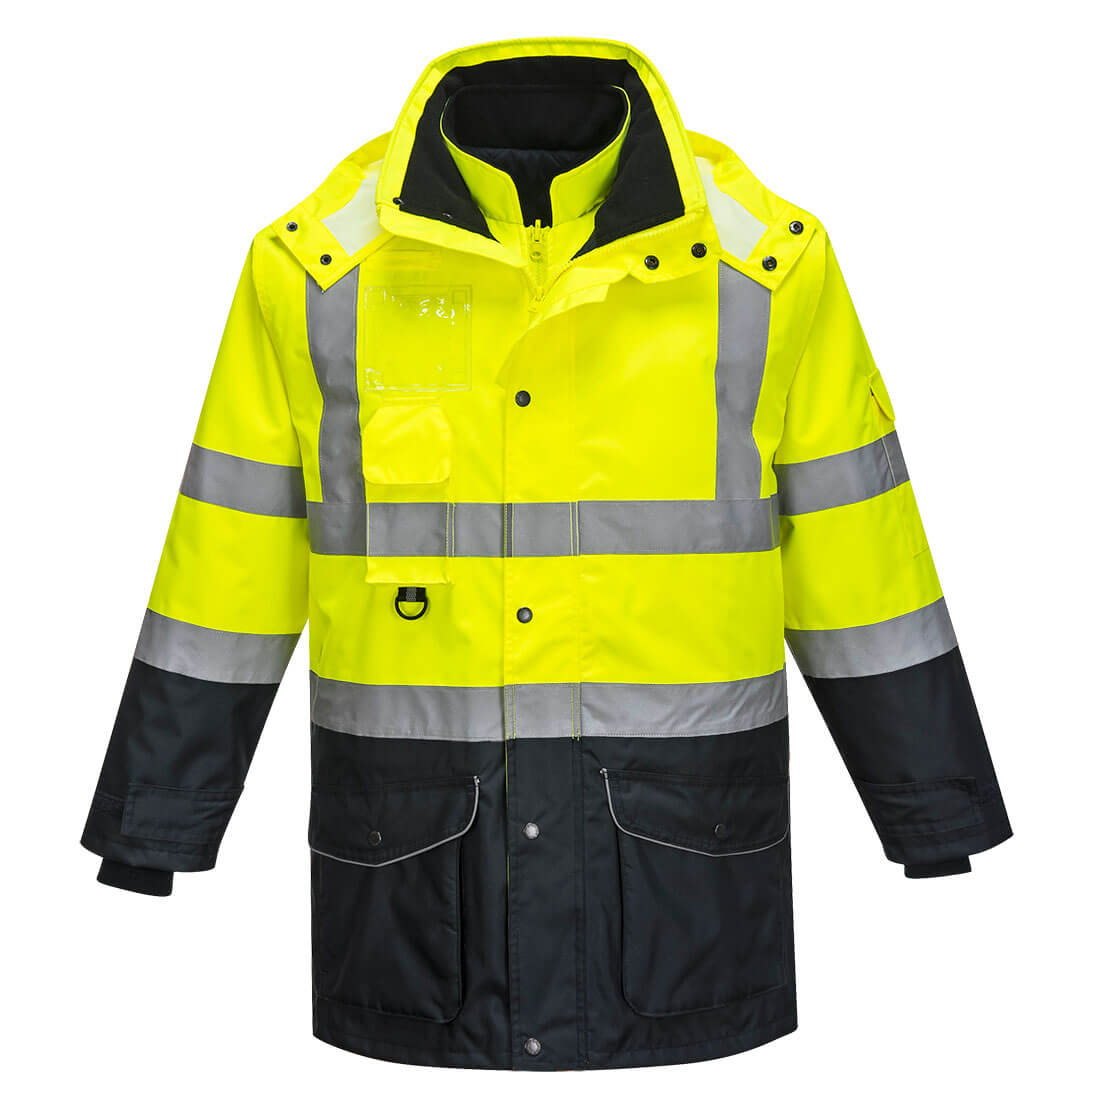 Image of Oxford Weave 300D Class 3 Hi Vis 7-in-1 Contrast Traffic Jacket Yellow / Navy 4XL